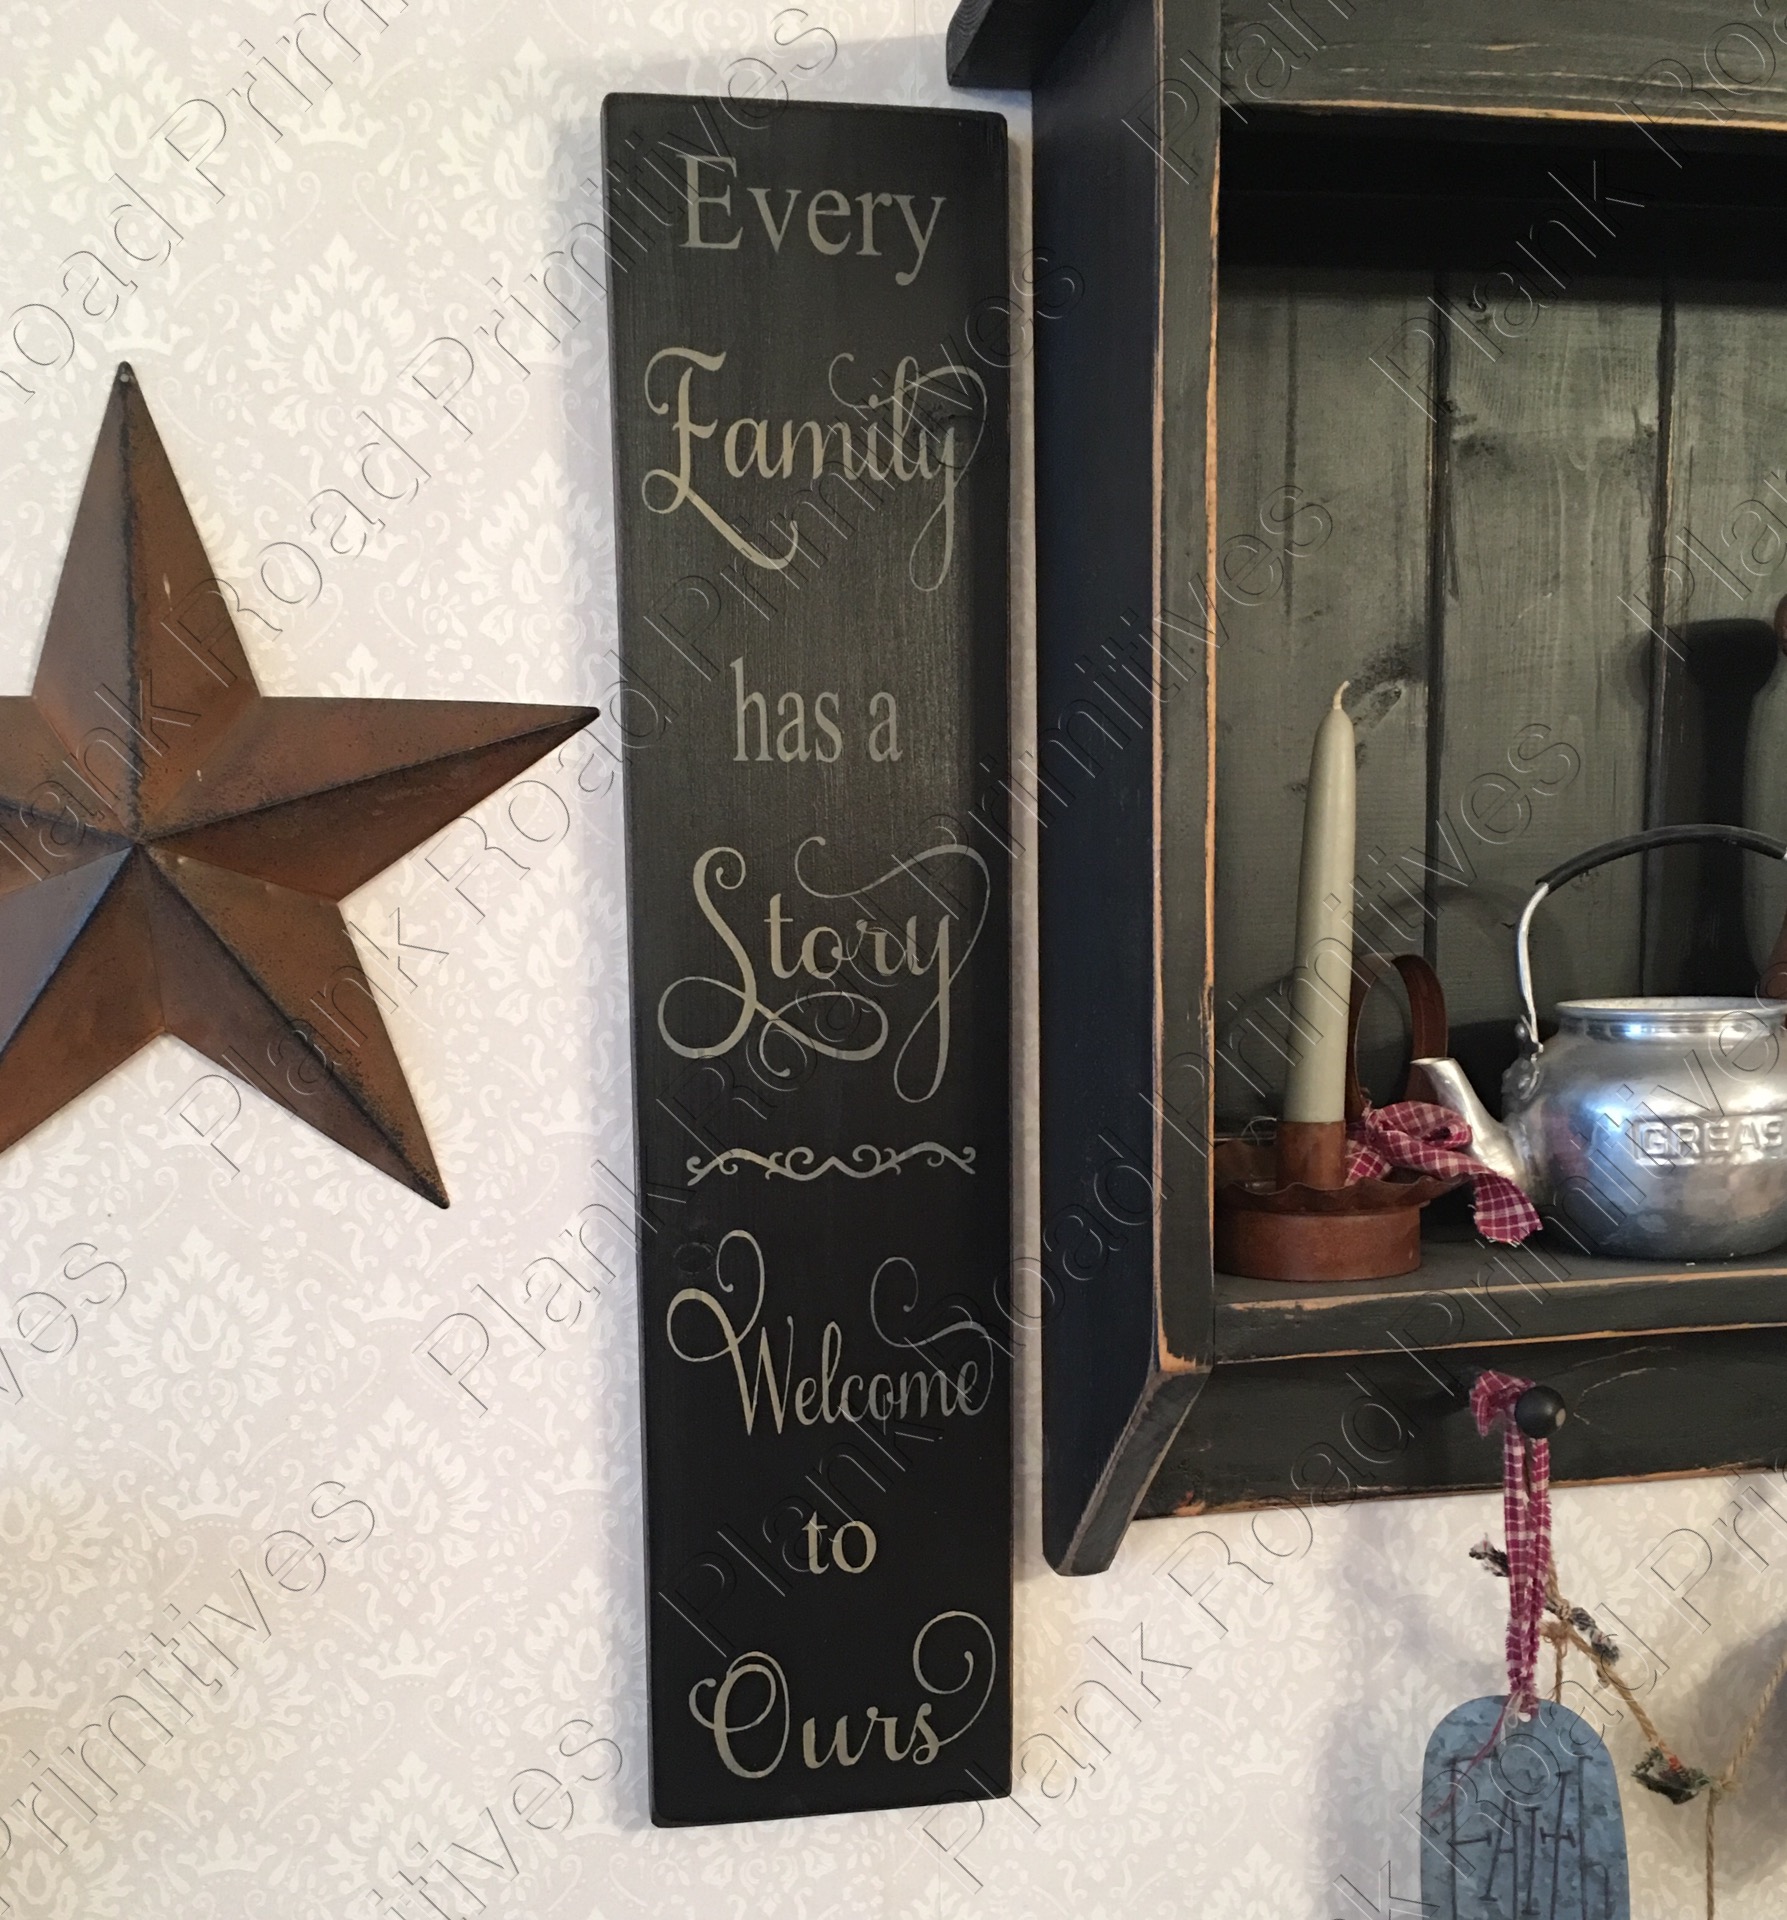 Every Family Has A Story Welcome To Ours - 5.5"x24"